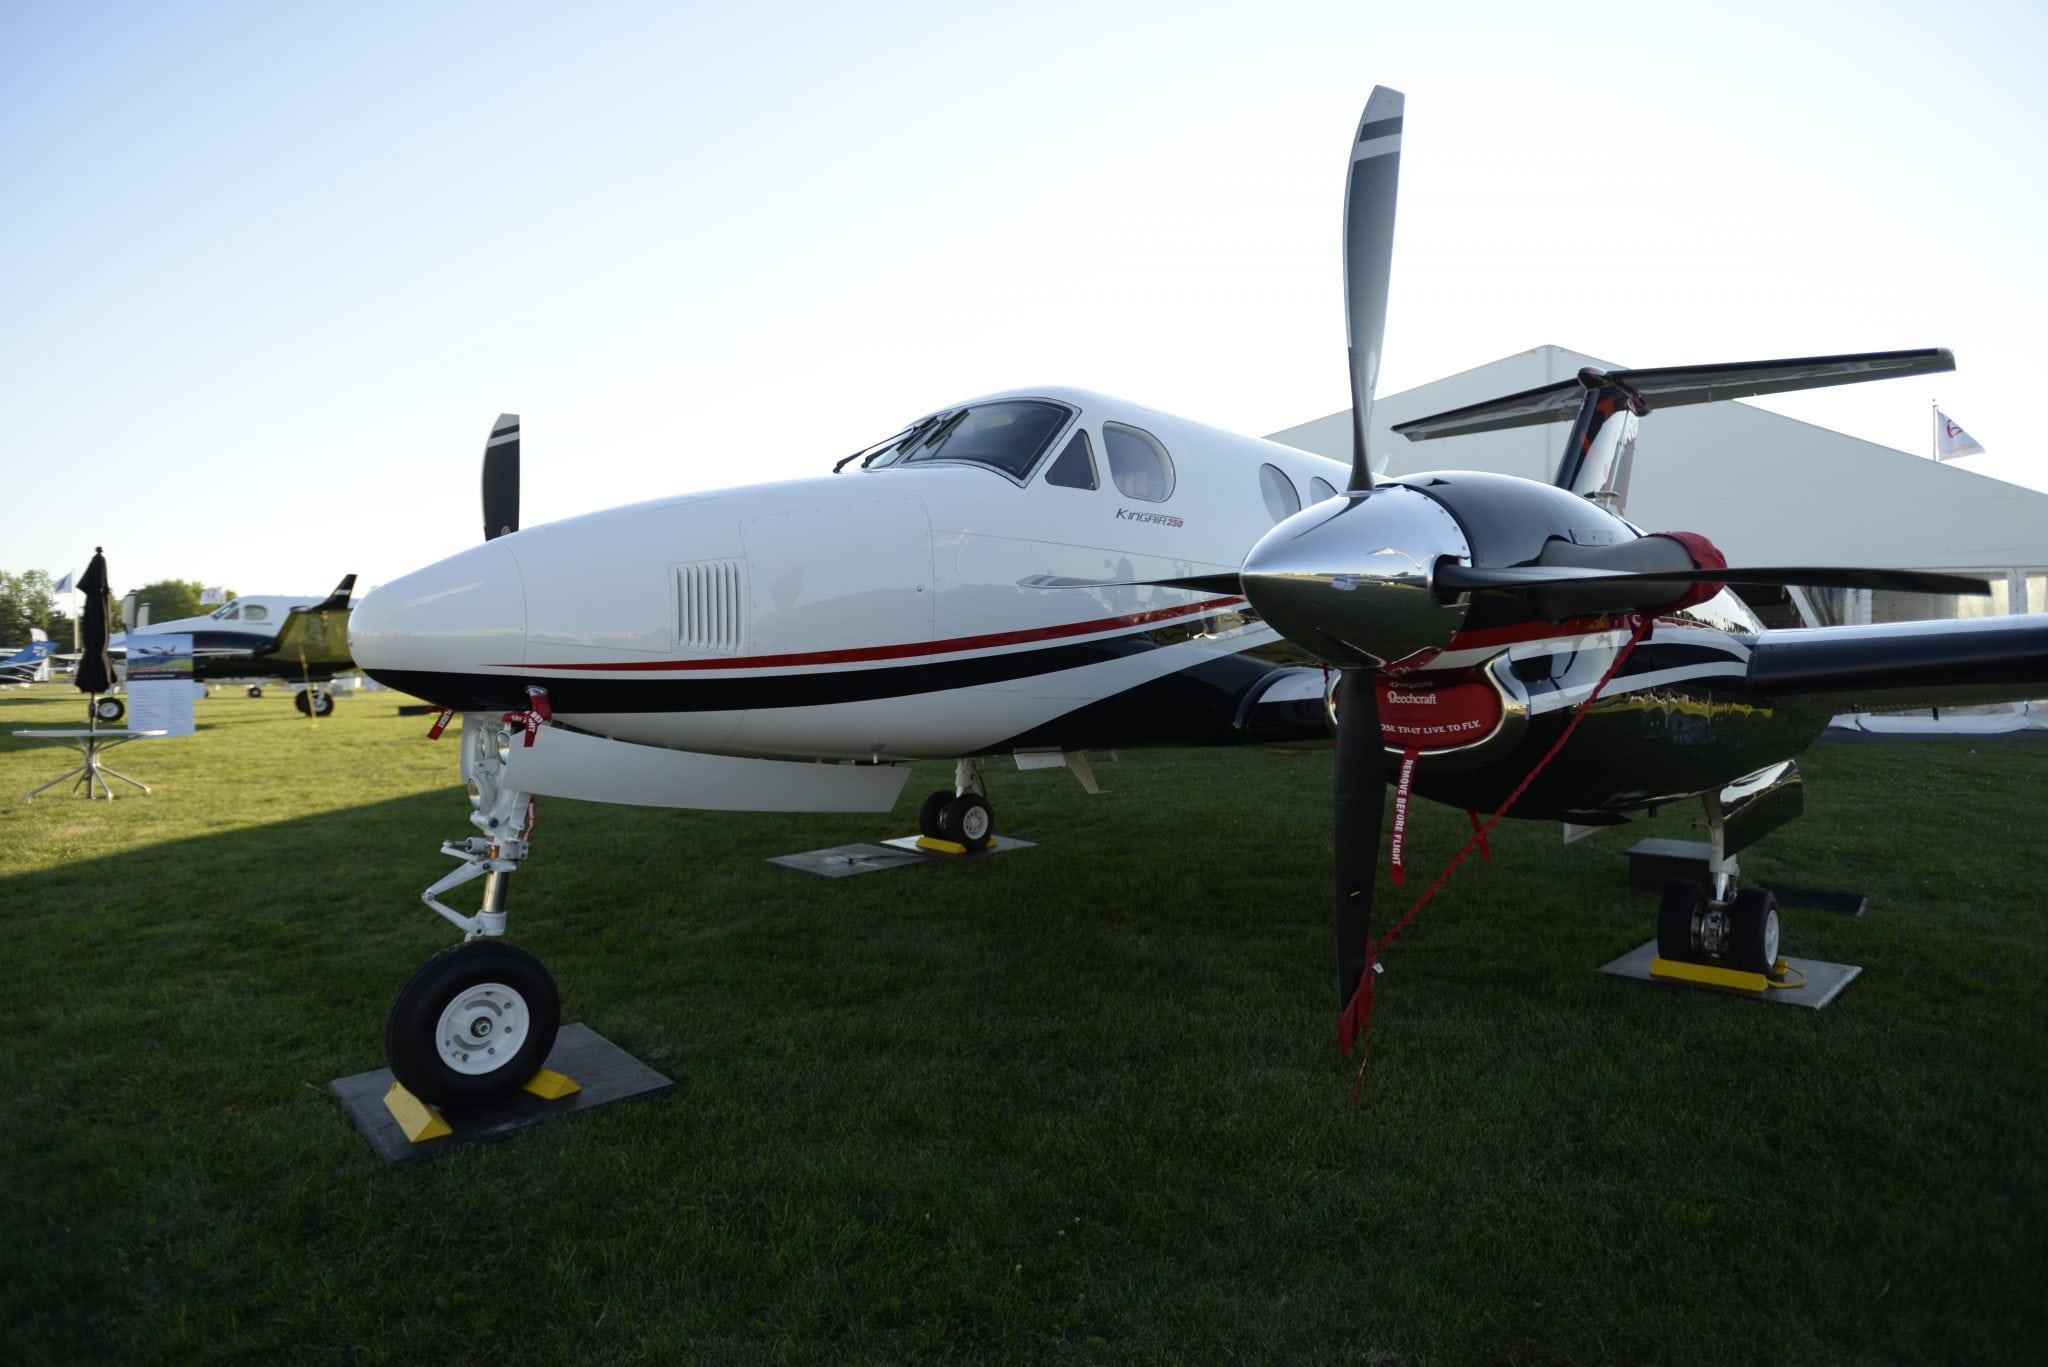 Beechcraft King Air 250 at the Experimental Aircraft Association AirVenture in Oshkosh where it is making its North American debut